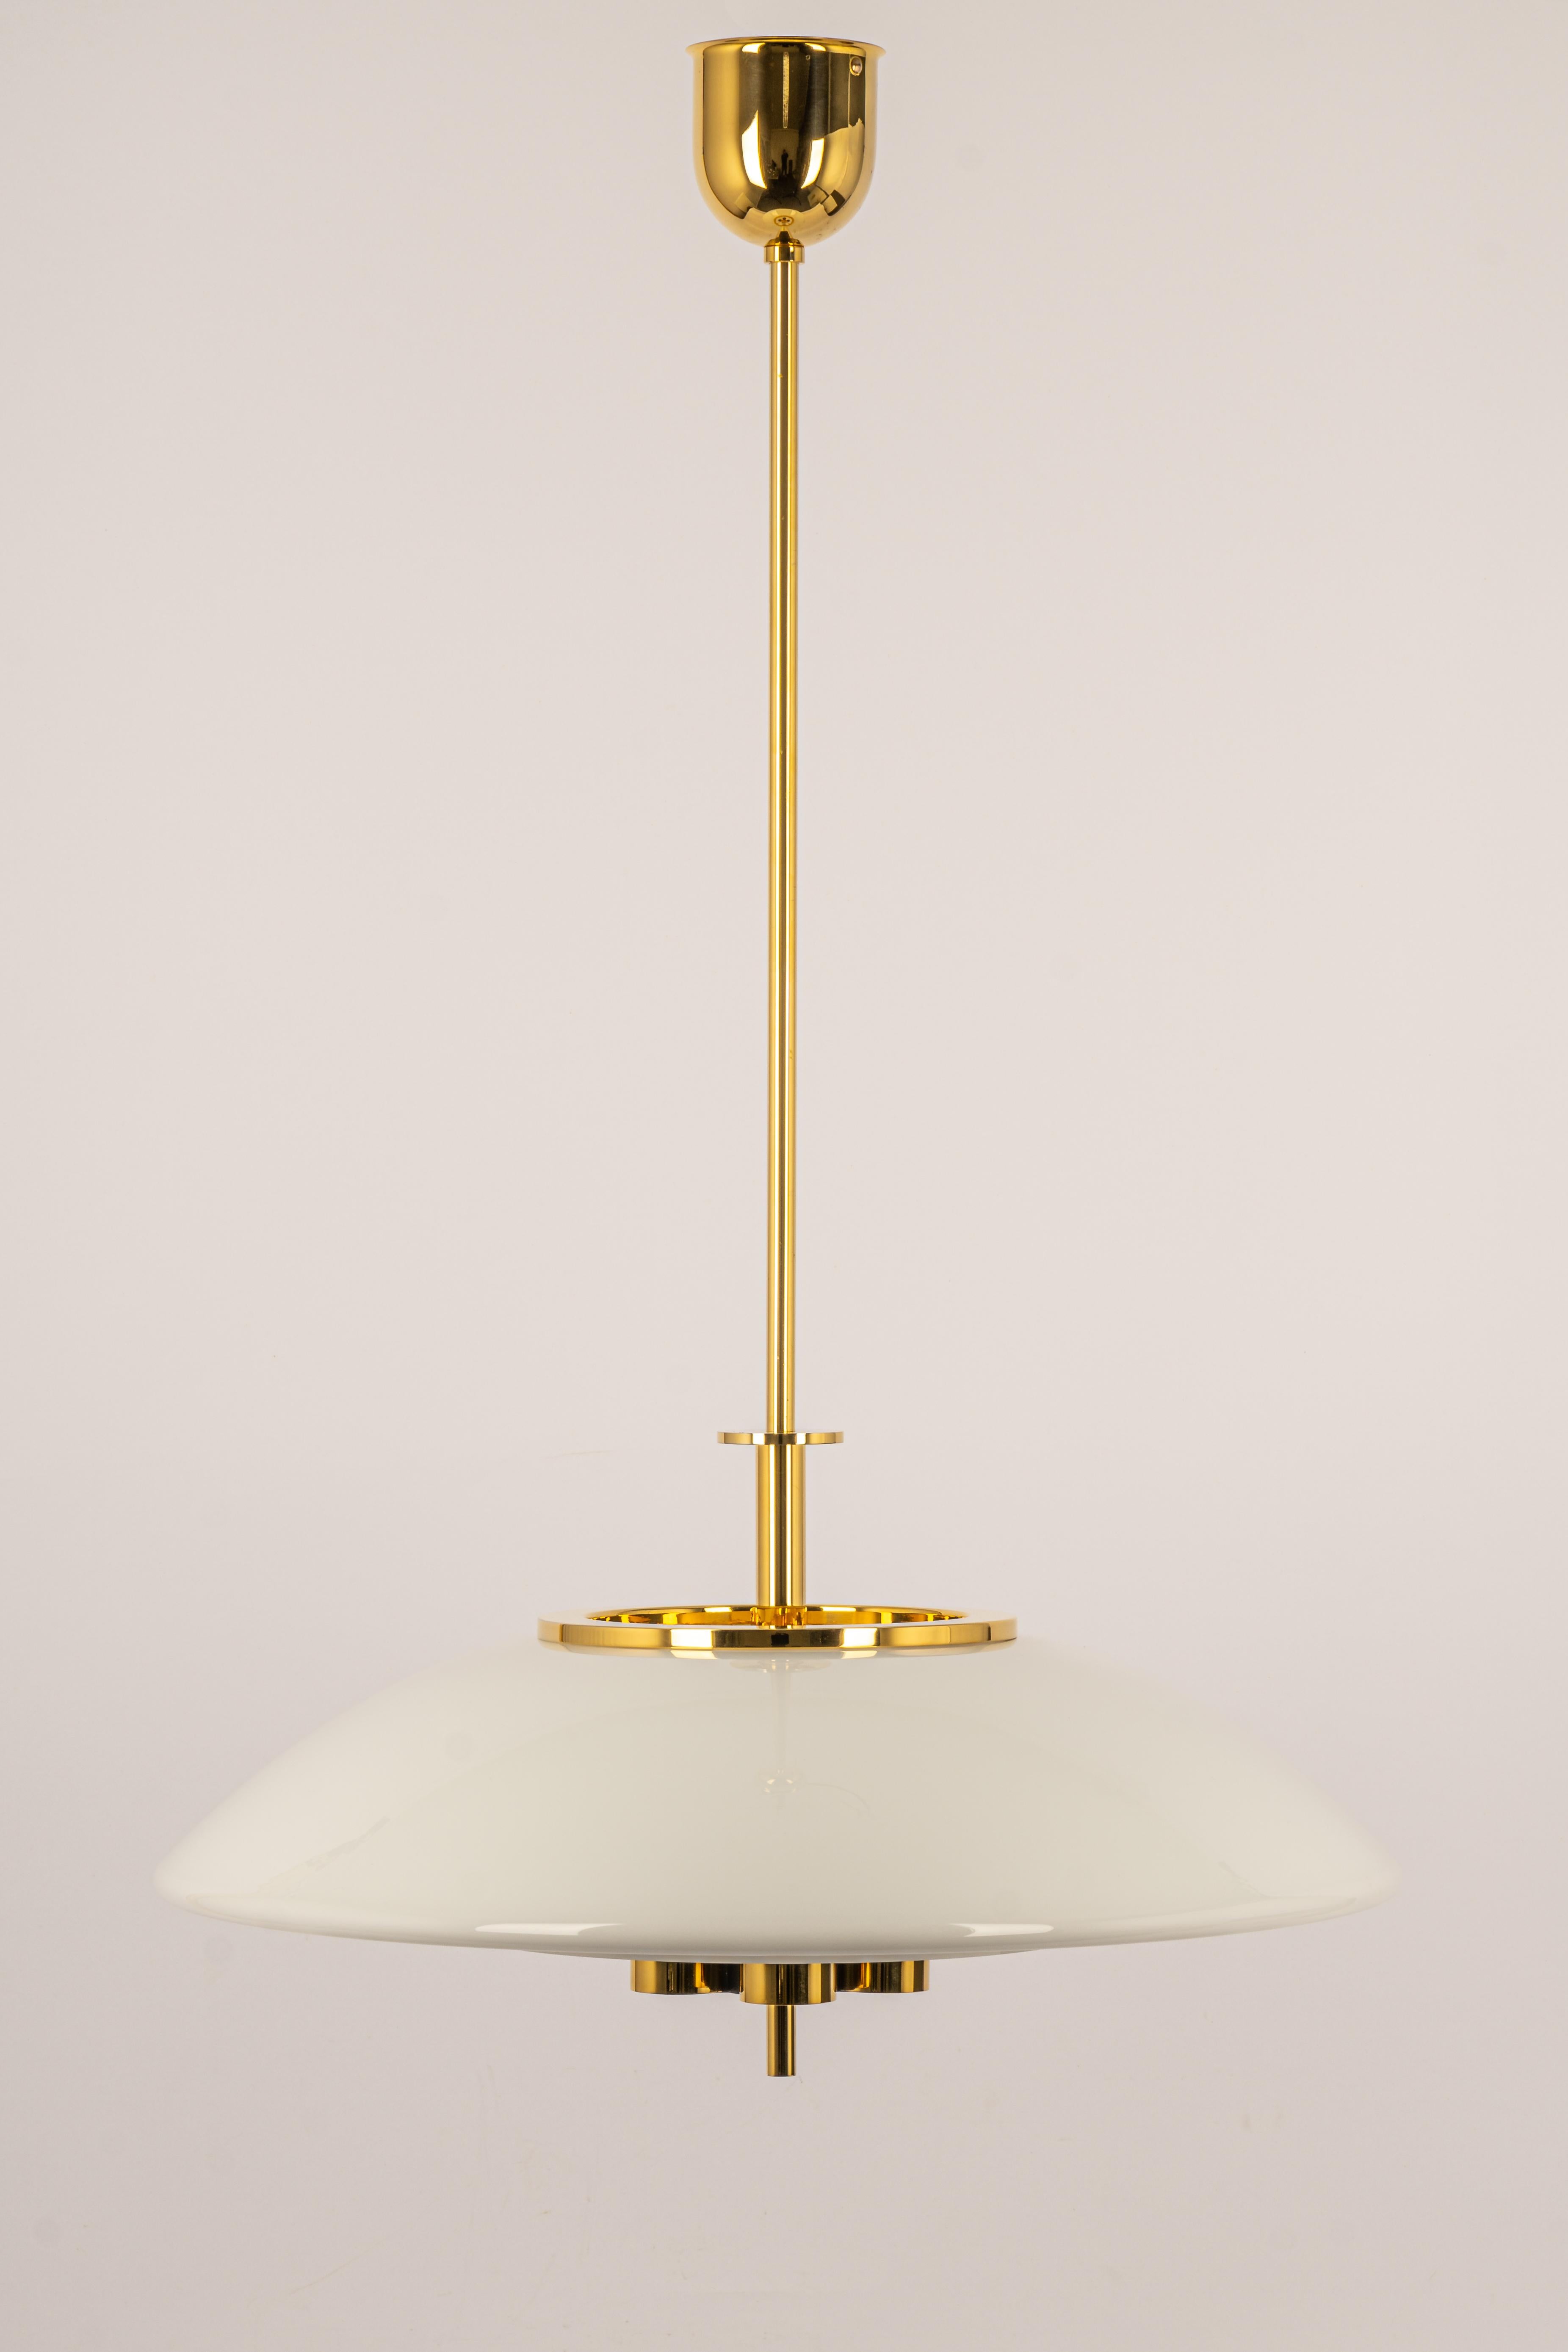 Large Opal glass (hand-made) pendant light, manufactured by Limburg, Germany, circa 1980-1989.

Sockets: 4 x E27 standard bulbs.
Light bulbs are not included. It is possible to install this fixture in all countries (US, UK, Europe, Asia,